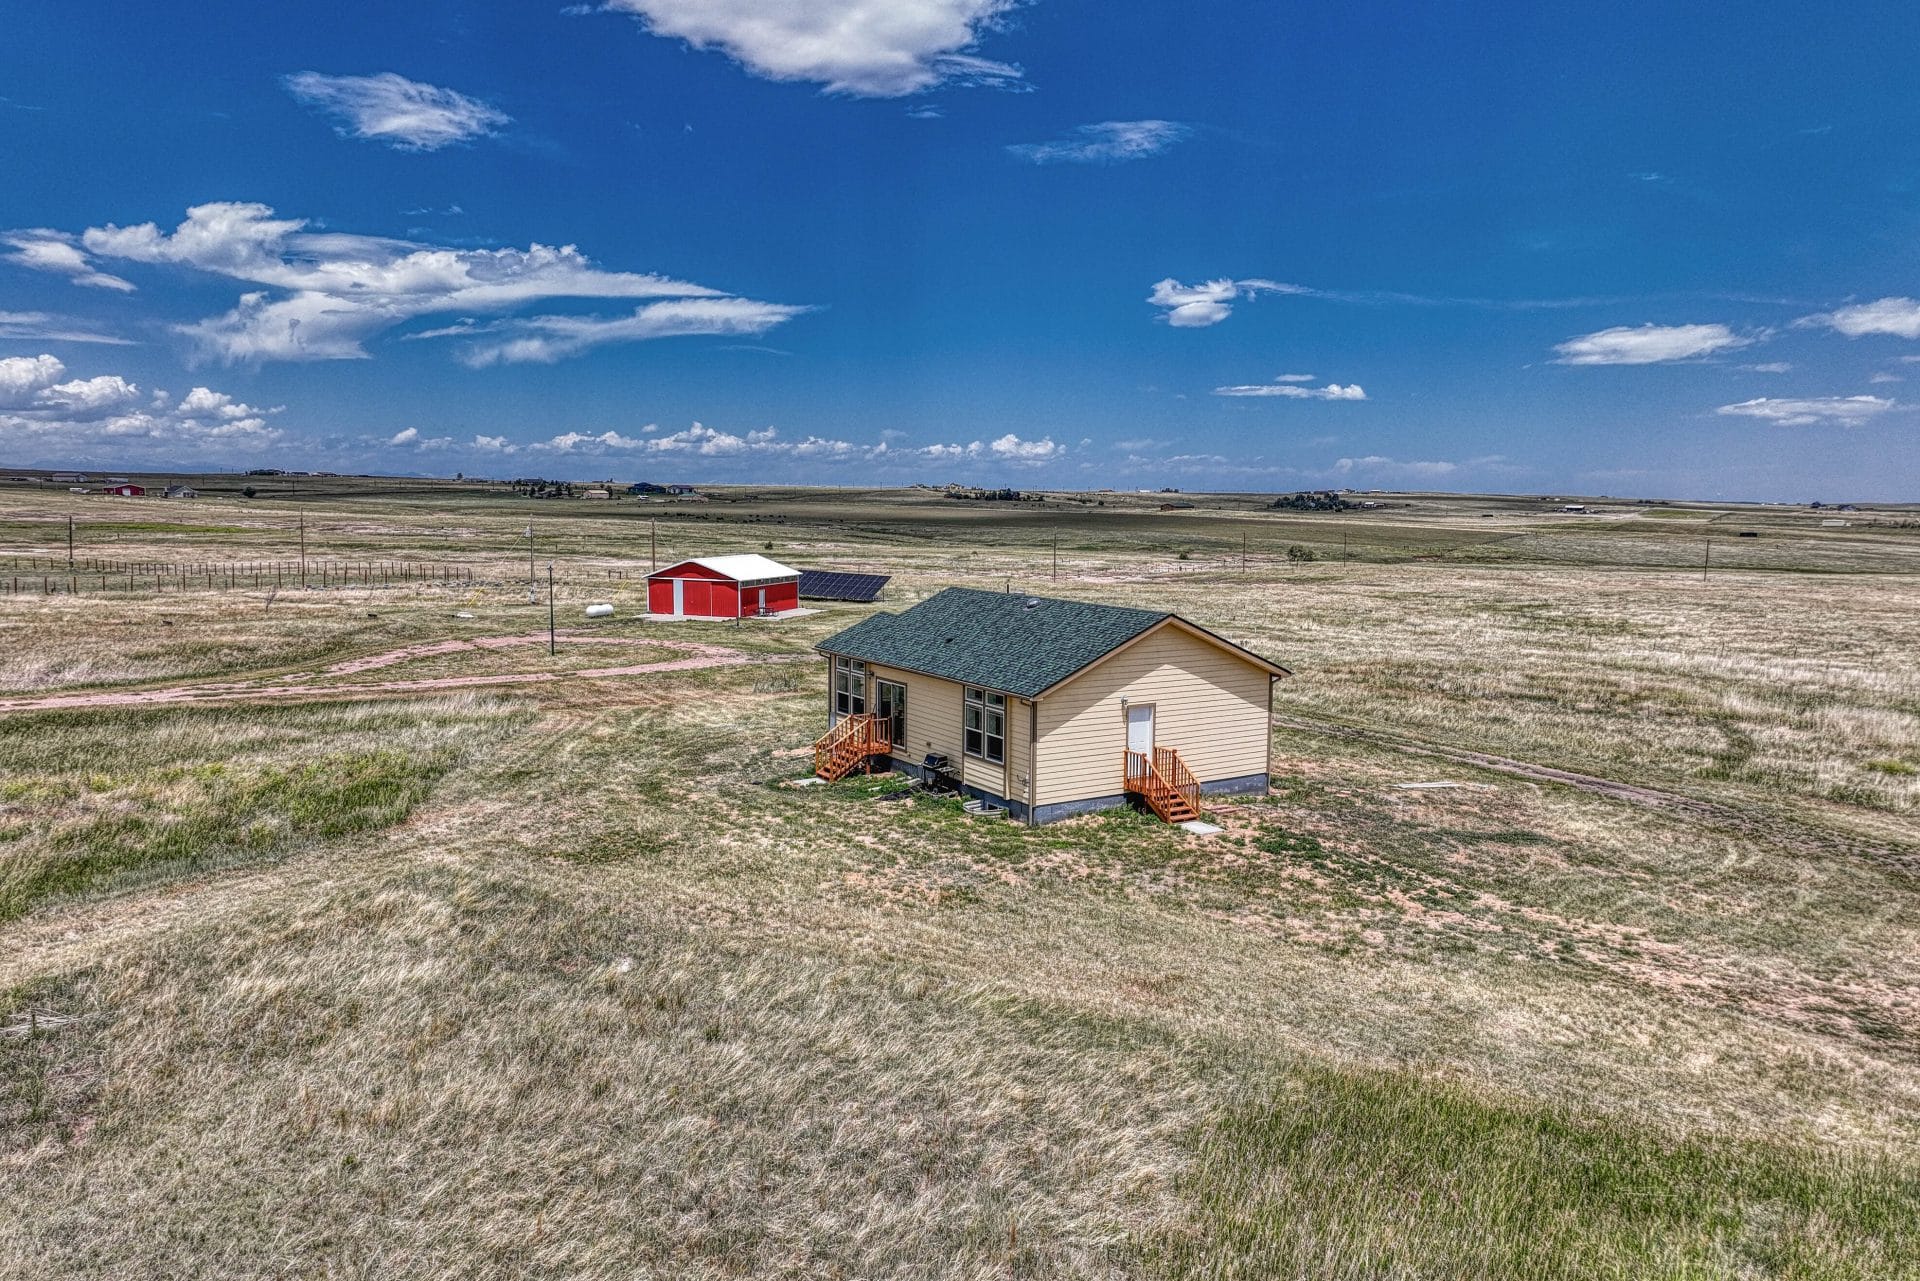 40 Acres for sale 1501 Private Road 104, Elbert, CO 80106